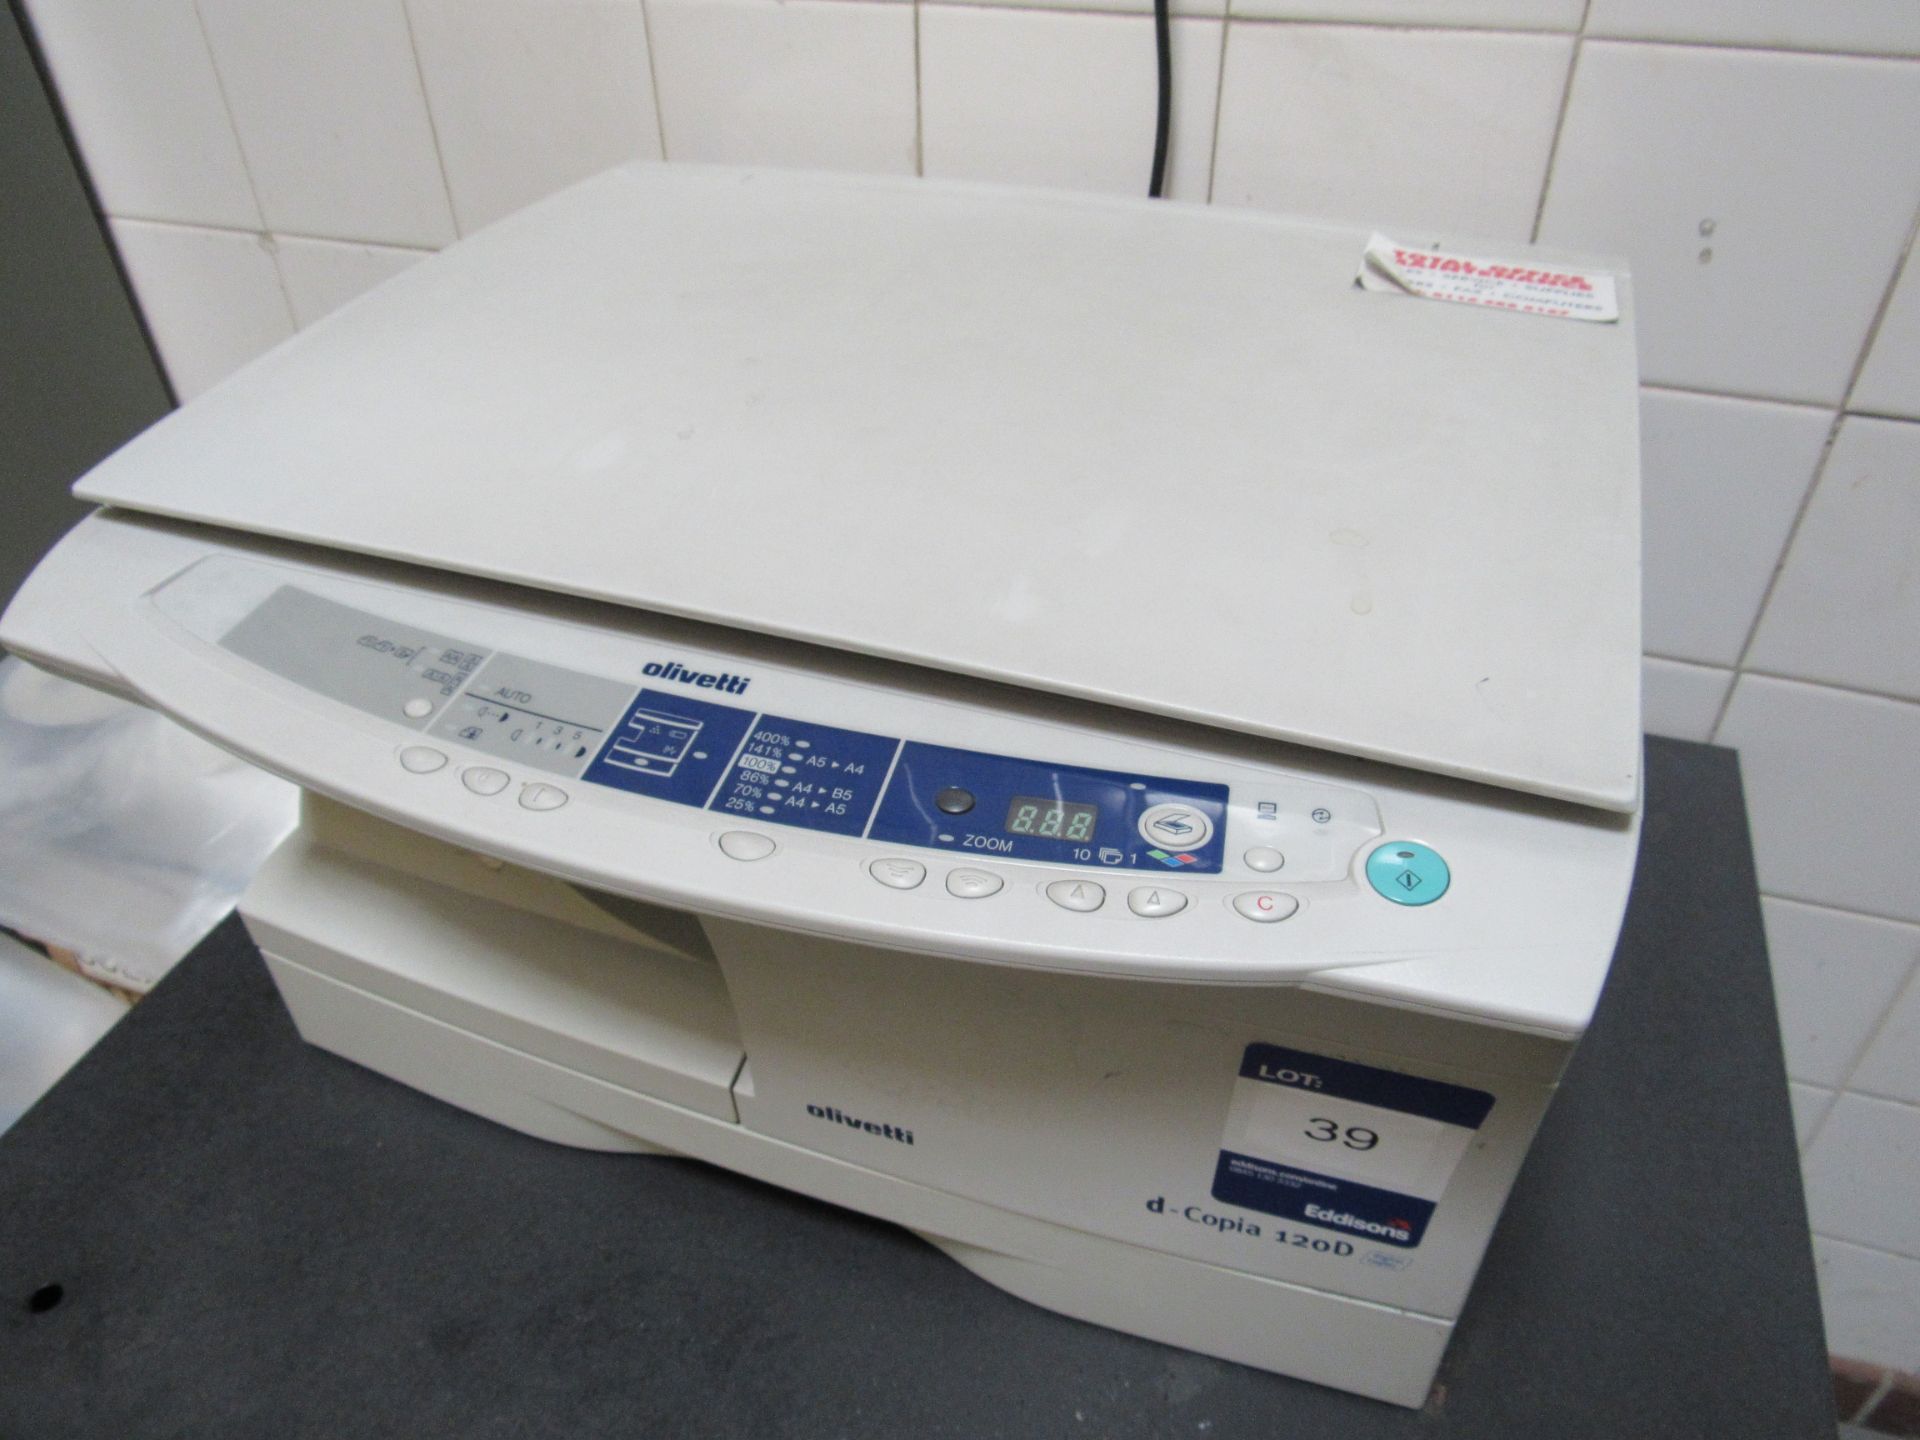 Olivetti d-copier 120D Photocopier and Storage Cupboard - Image 2 of 2